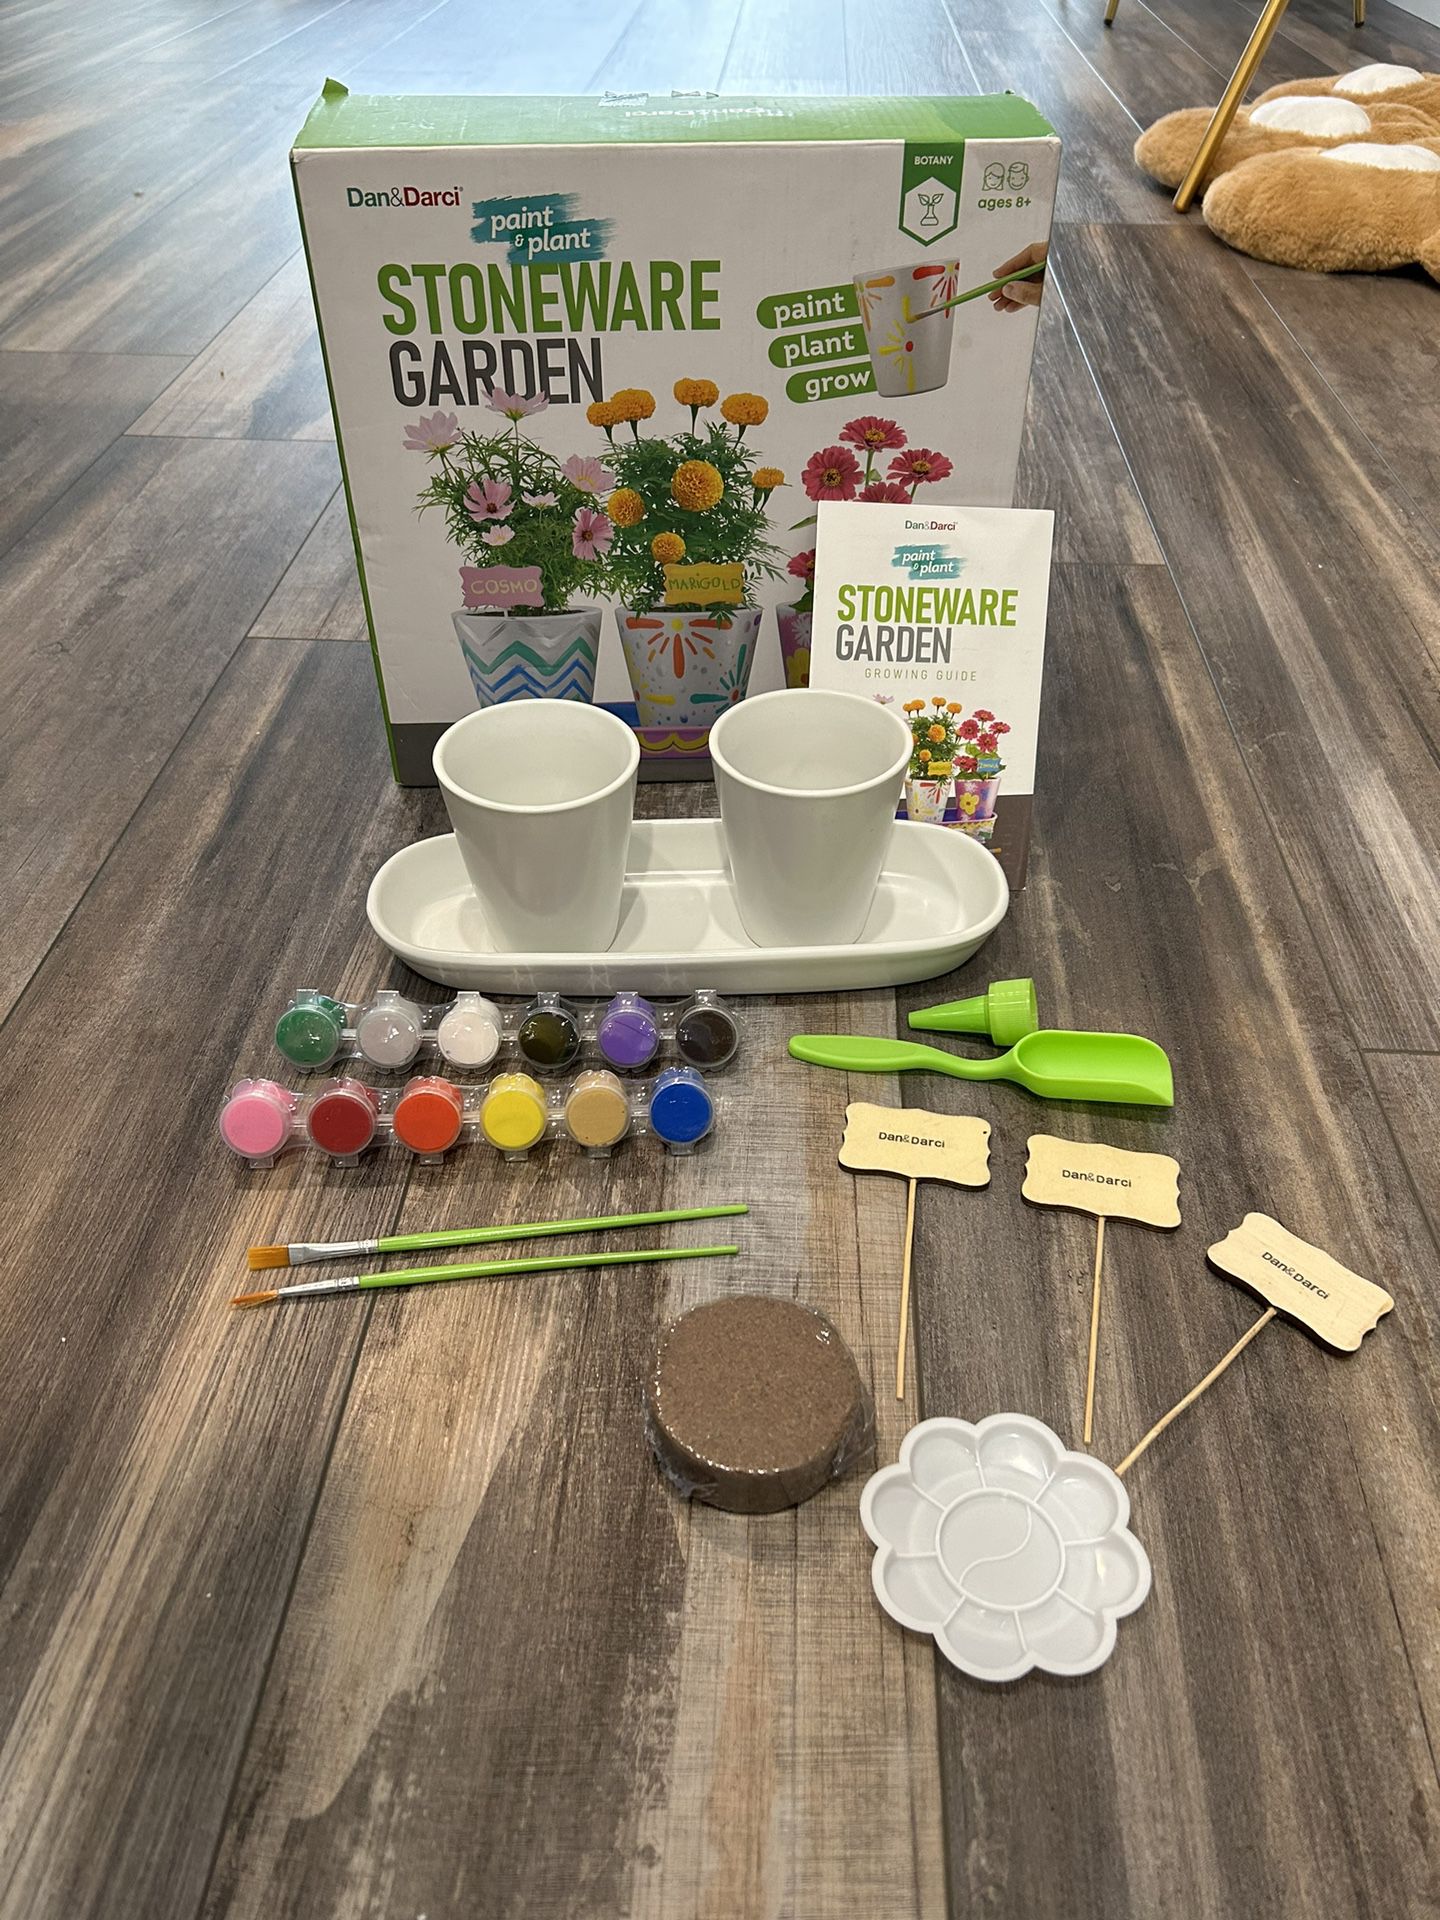 Paint & Plant Stoneware Flower Gardening Kit - Gifts for Girls & Boys Ages 4-12 - Kids Arts & Crafts